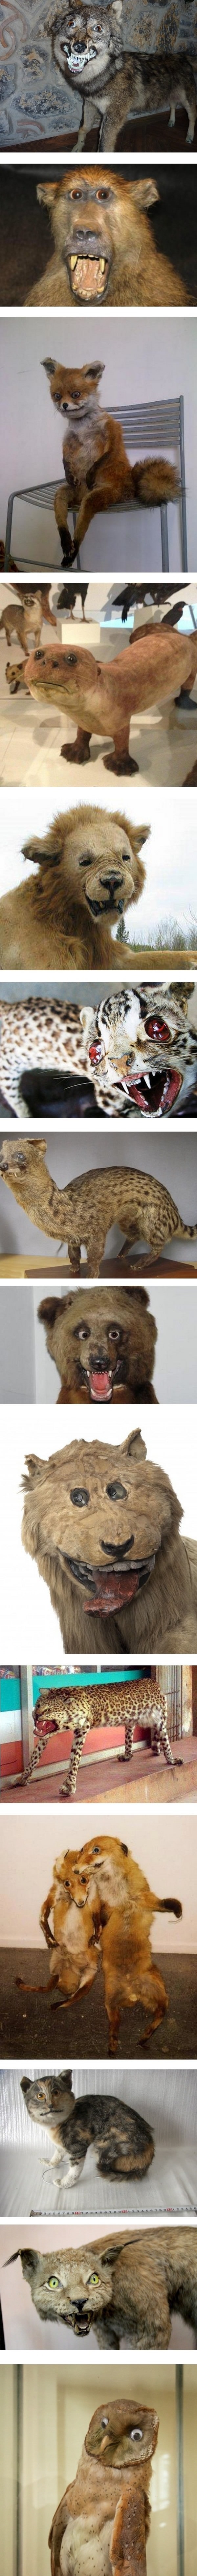 Taxidermy gone wrong